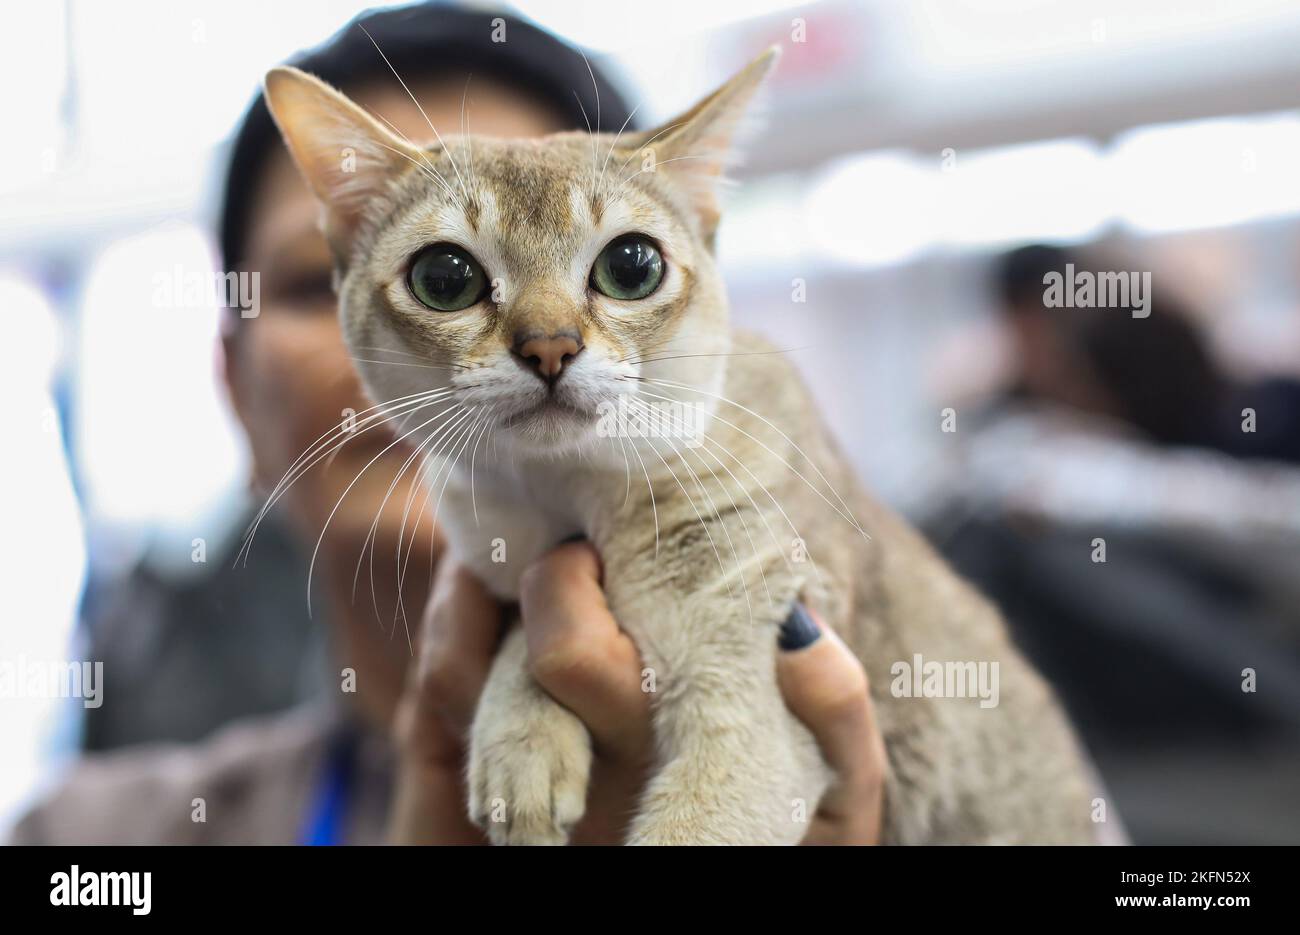 The international cat show organized by the cat lovers' club Felis Croatia  was held at the Sports Center in Zagreb, Croatia on November 19, 2022.  Photo: Jurica Galoic/PIXSELL Stock Photo - Alamy